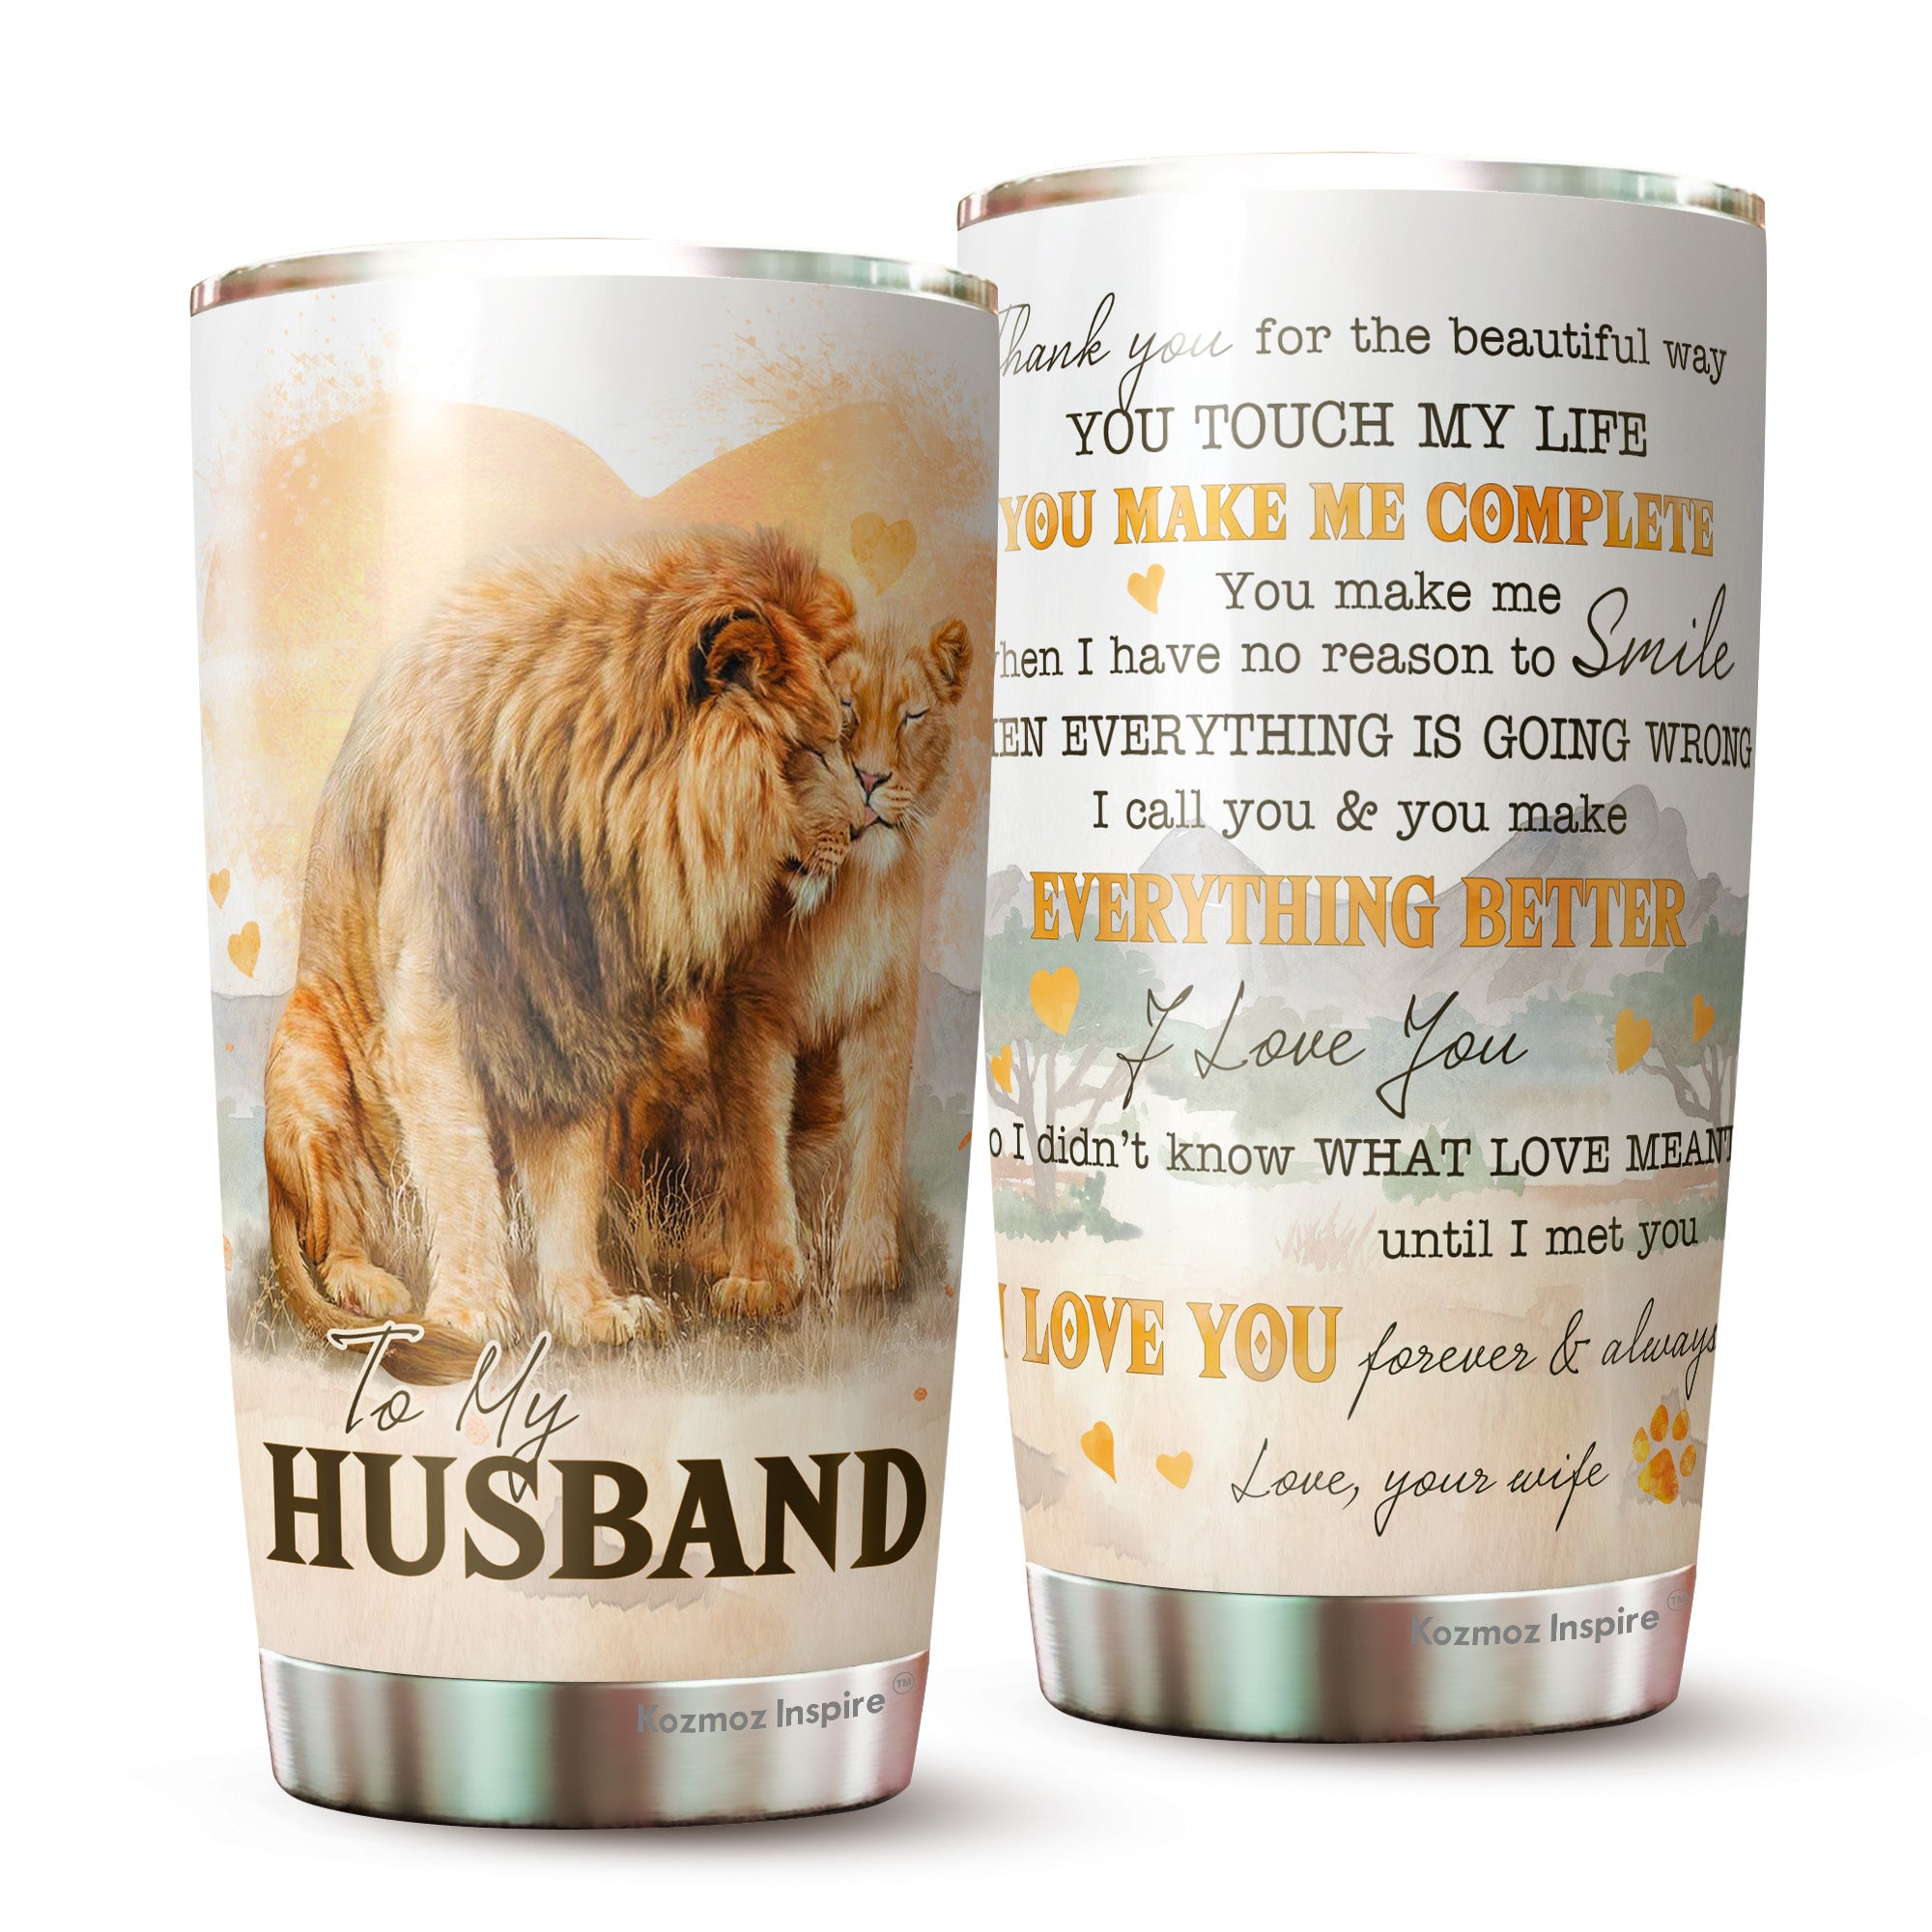 Valentines Day Gifts for Him - Stainless Steel Tumbler 20oz - Funny  Birthday Gift for Husband from Wife & Anniversary Present for Him - Gifts  for Men Best Husband - Christmas Gift